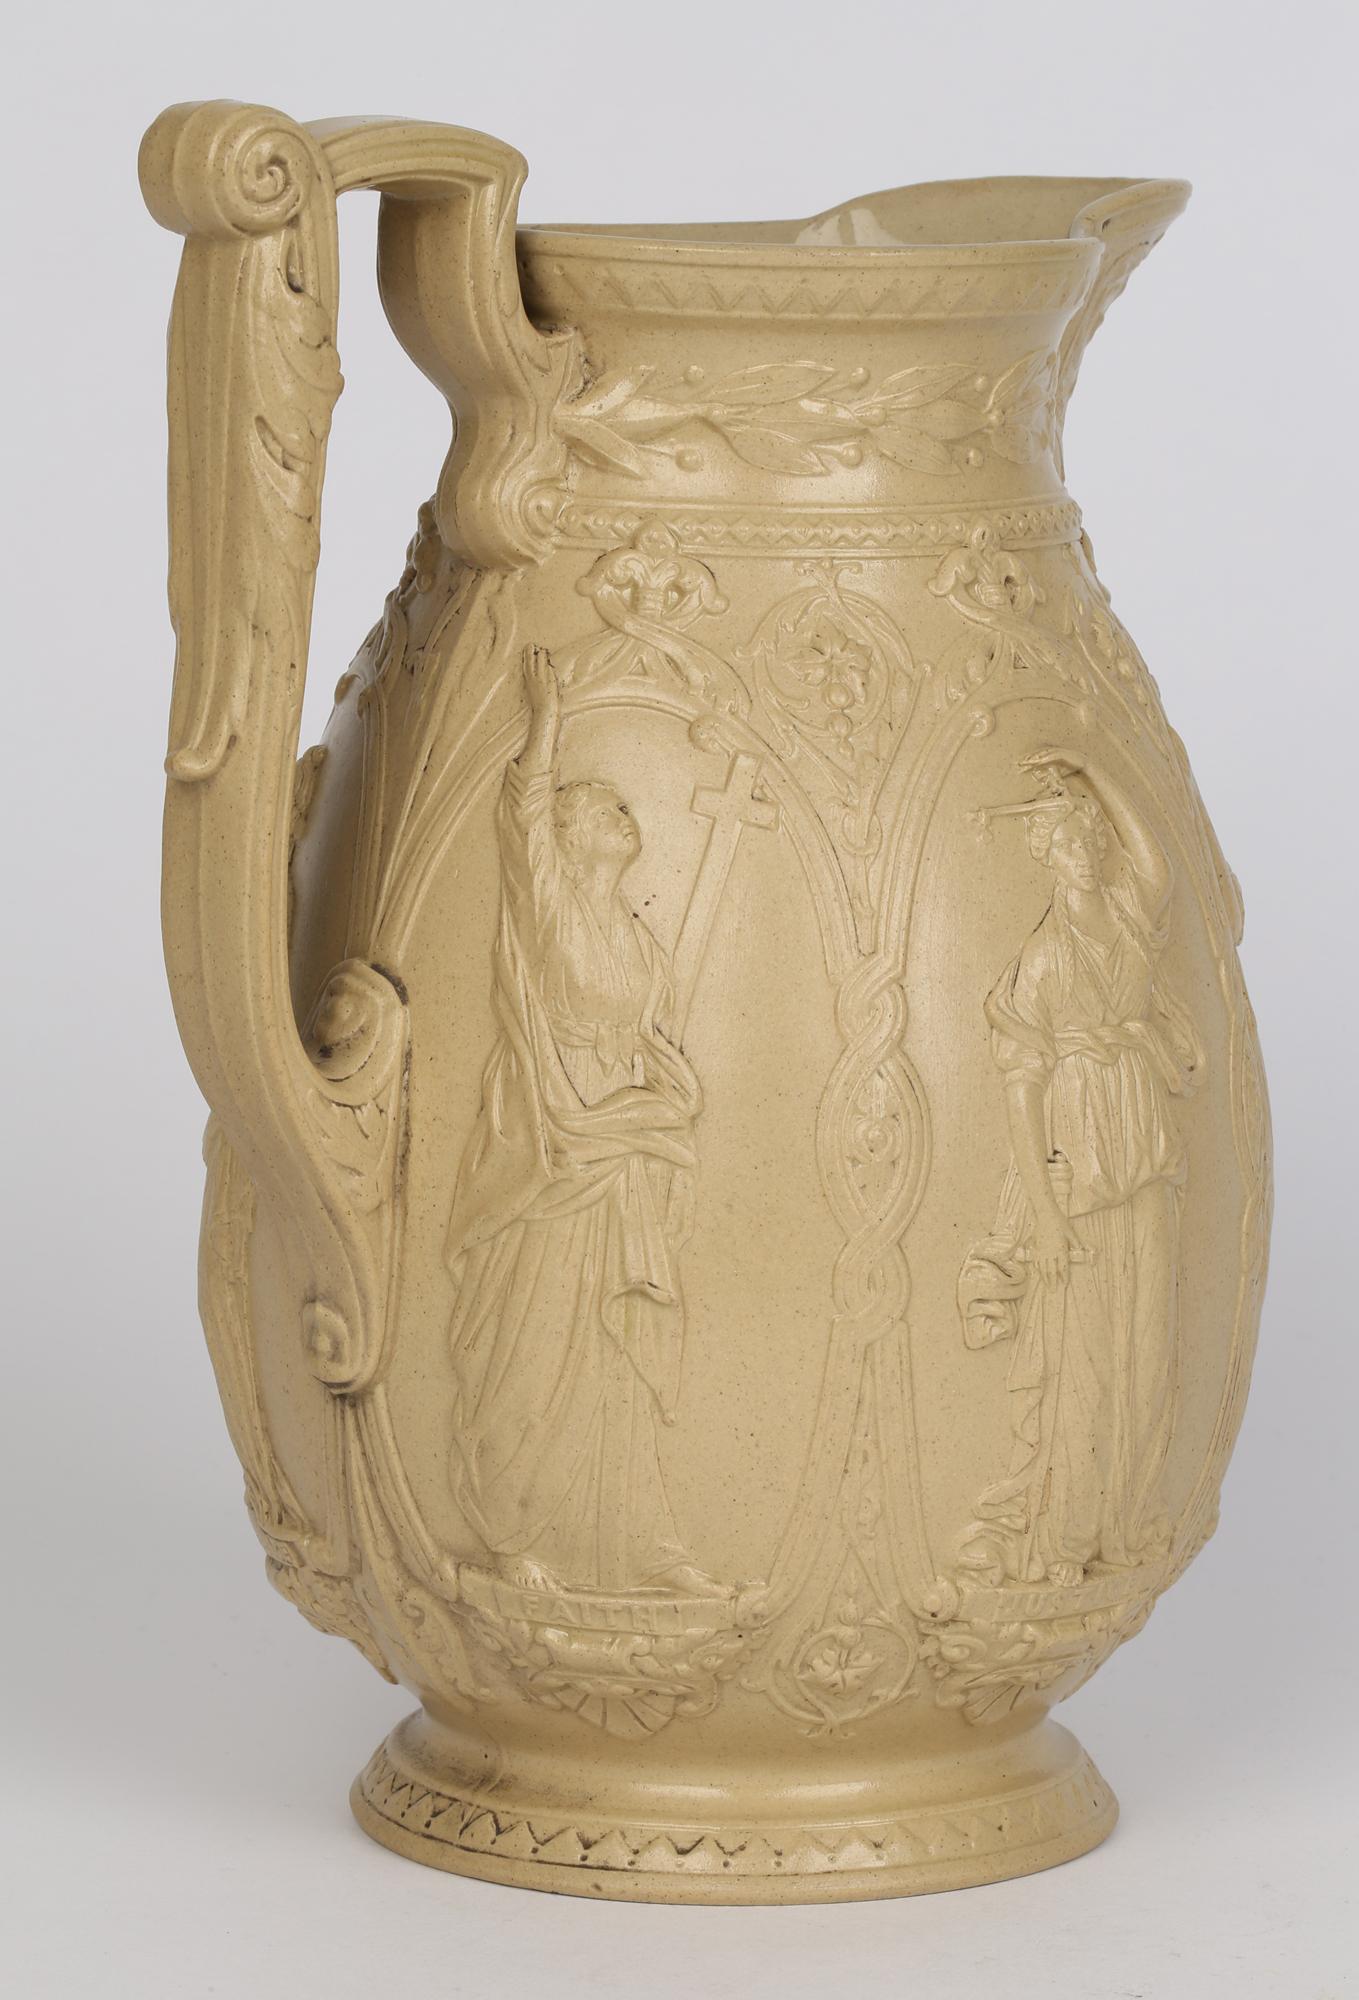 Old Hall Drabware Ceramic Jug with Female Cardinal Virtues Figures For Sale 3